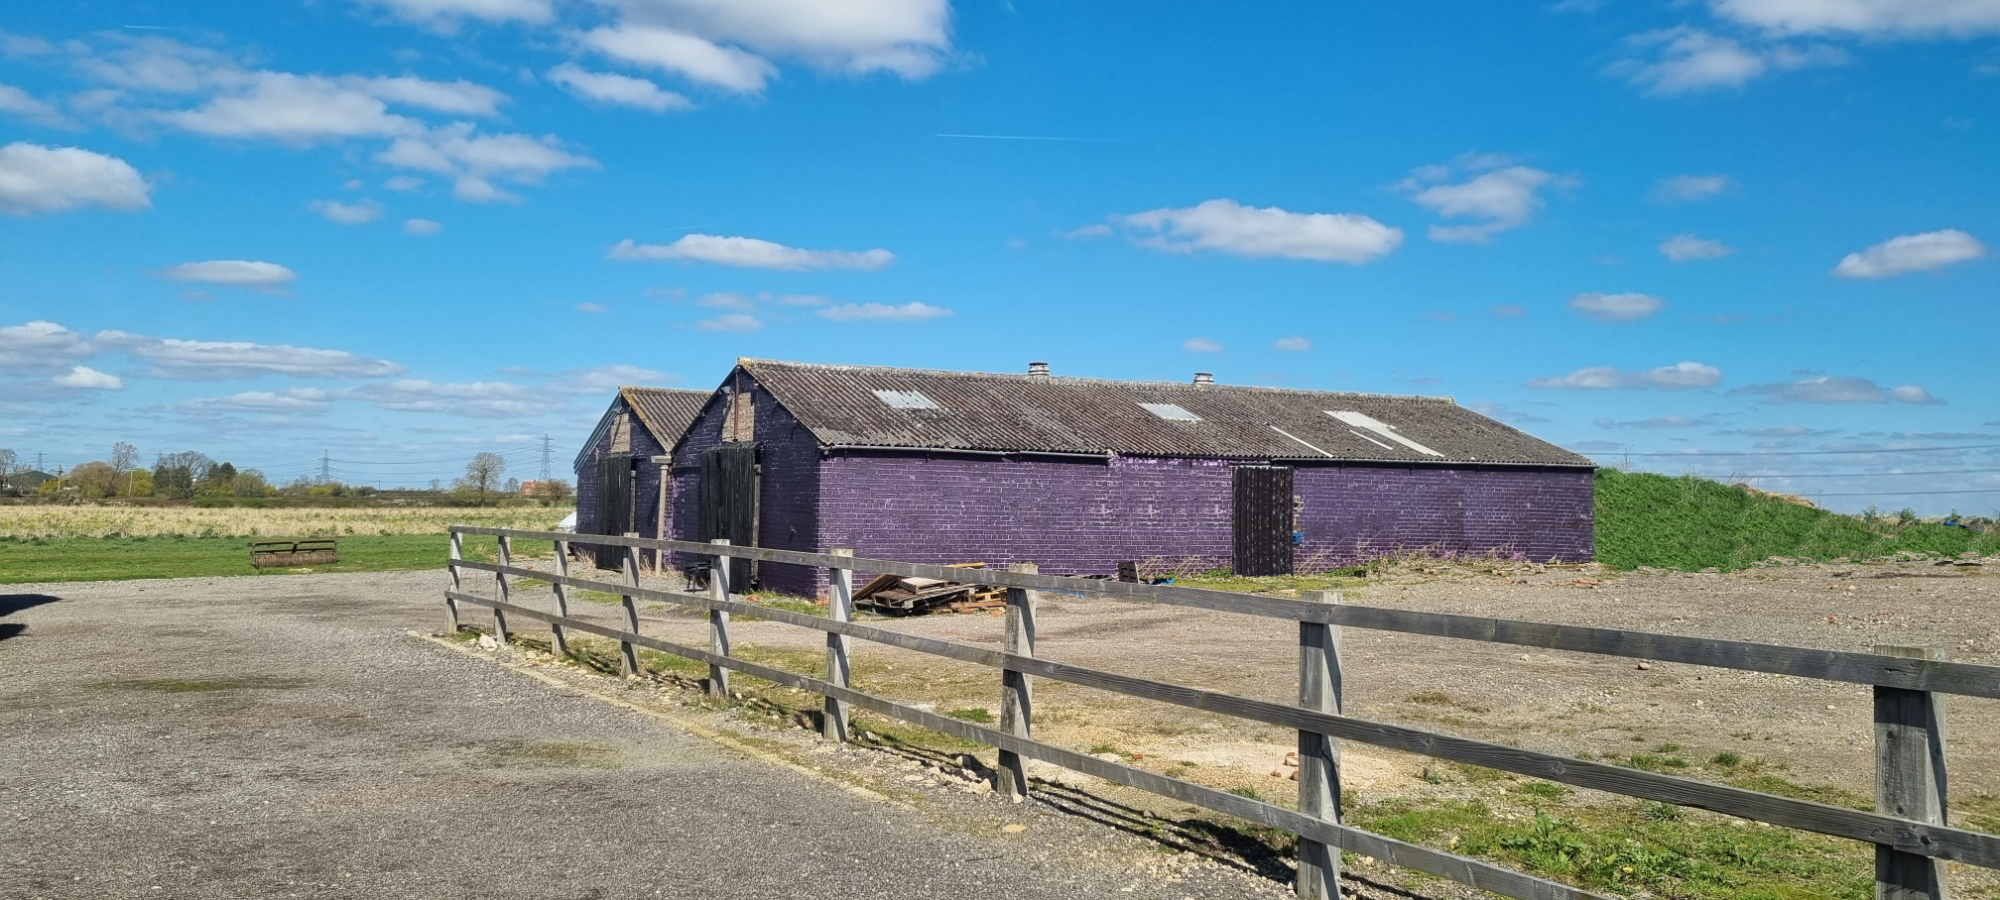 Class Q - Plans approved to convert a former agricultural barn into a stunning new home â€“ Hardwick near Lincoln